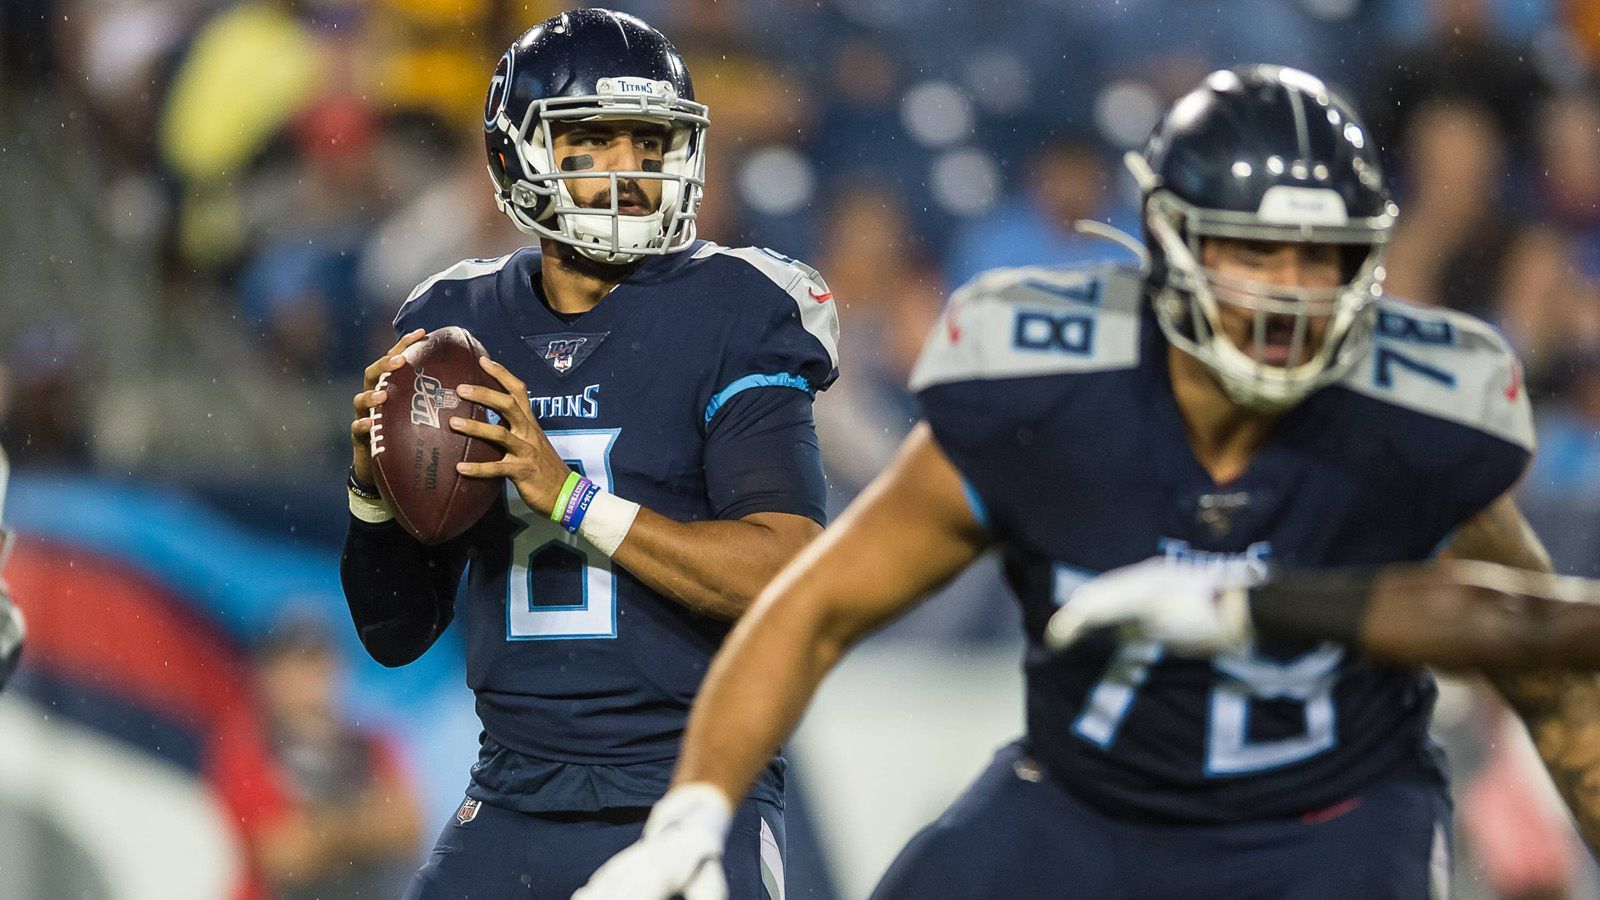 
                <strong>Tennessee Titans</strong><br>
                Team Captains: Marcus Mariota (QB), Kevin Byard (S), Jurrell Casey (DL), Ben Jones (C), Wesley Woodyard (LB)
              